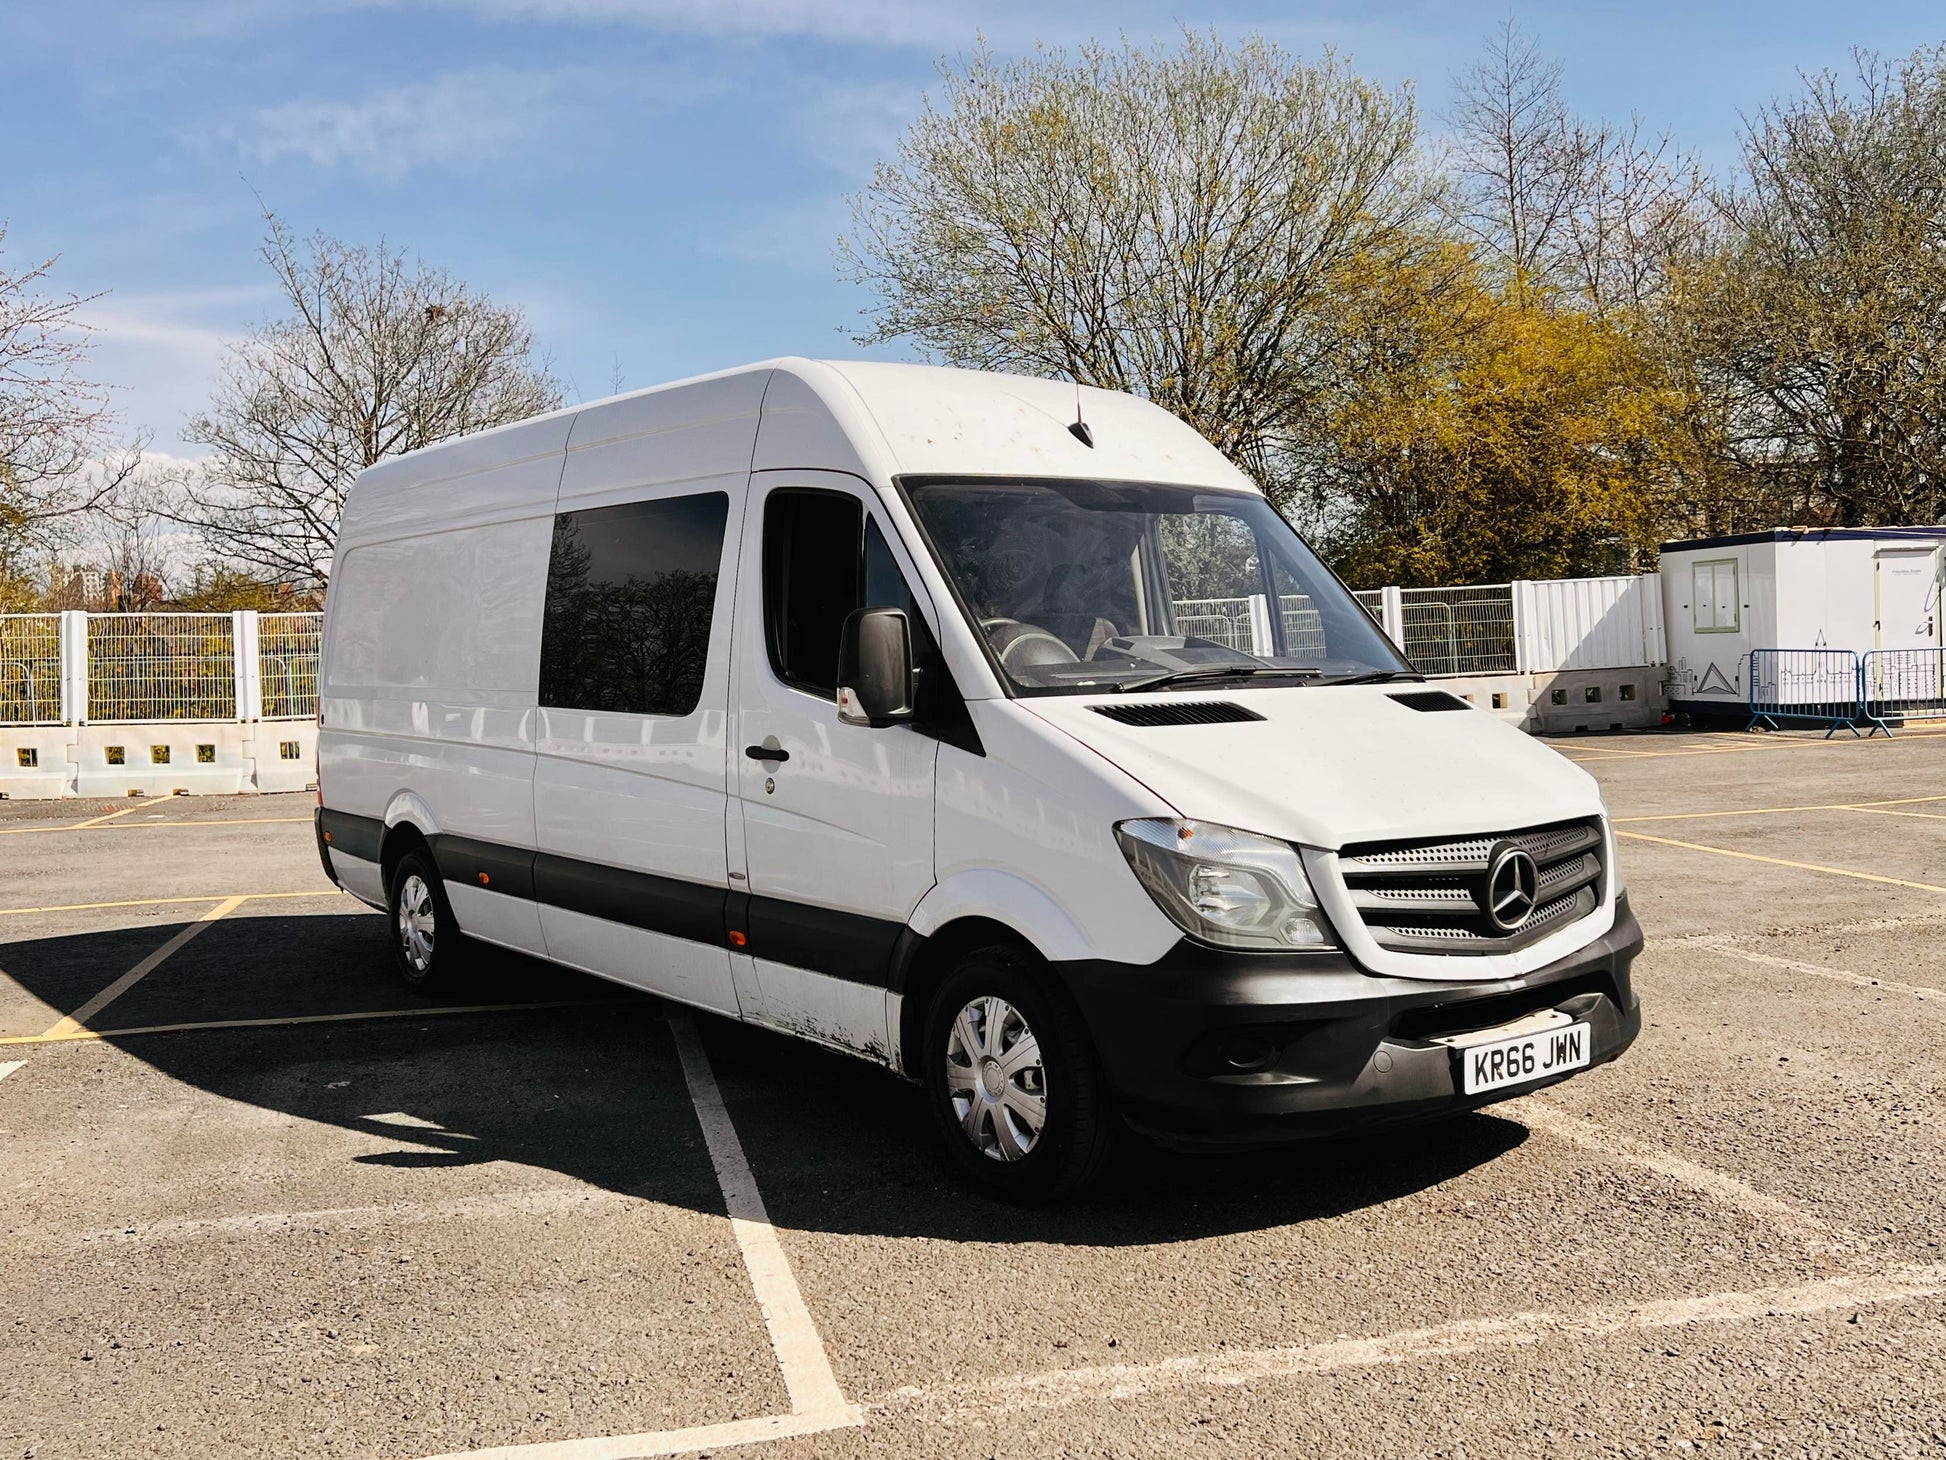 Bid on 2016 MERCEDES SPRINTER 314 CDI CREWCAB 6 SEATER- Buy &amp; Sell on Auction with EAMA Group